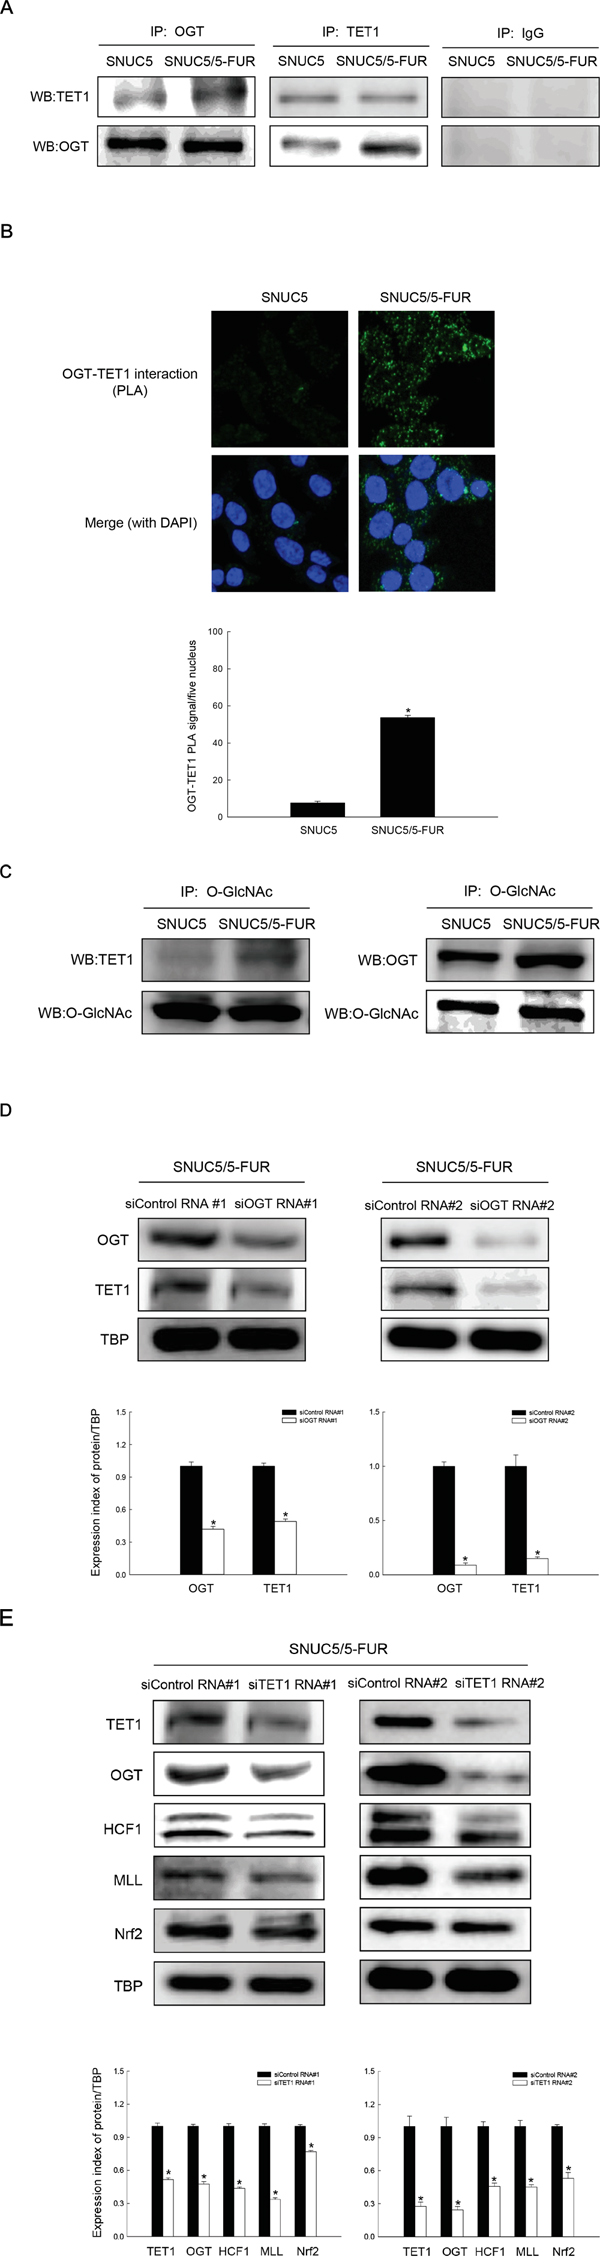 Relation of OGT-TET1 interaction on histone methylation and Nrf2 expression in SNUC5/5-FUR cells.